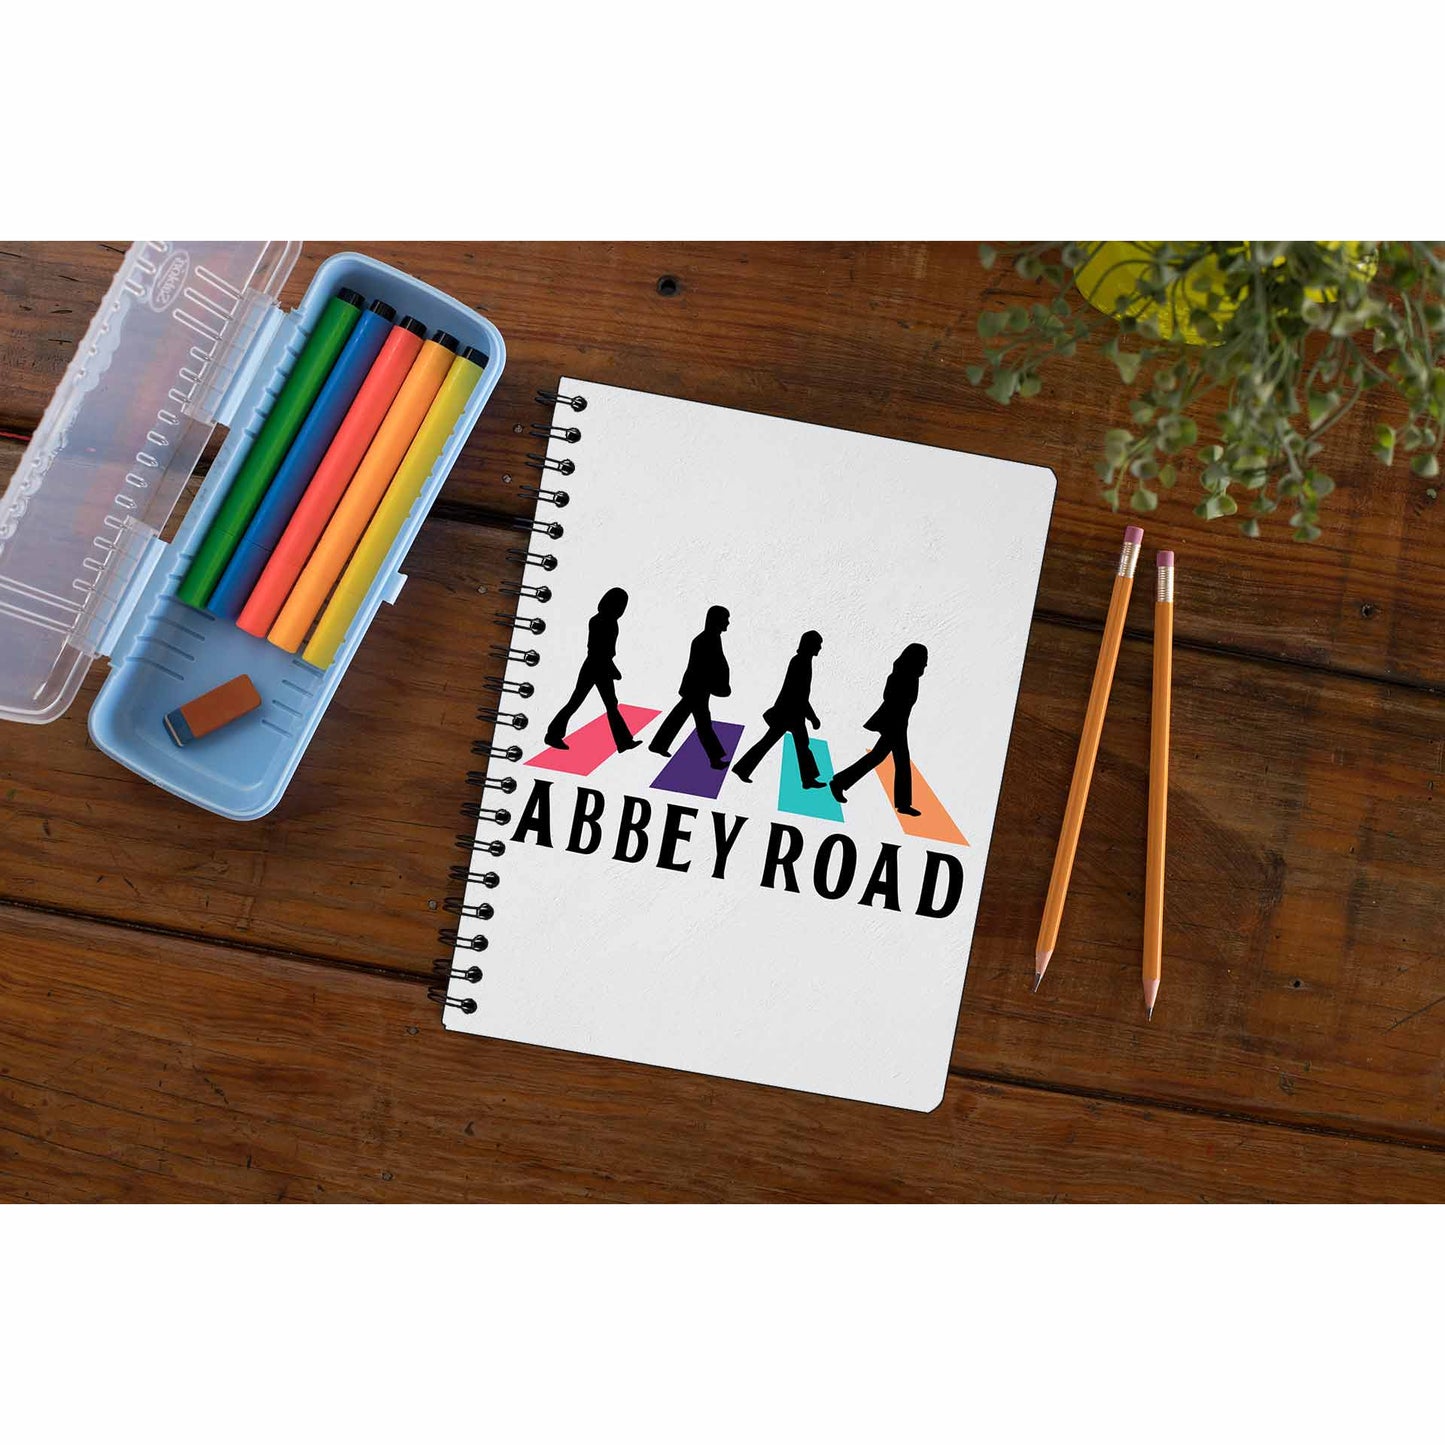 The Beatles Notebook - Abbey Road Notebook The Banyan Tee TBT Notepad paper online diary personal girls cute office under 100